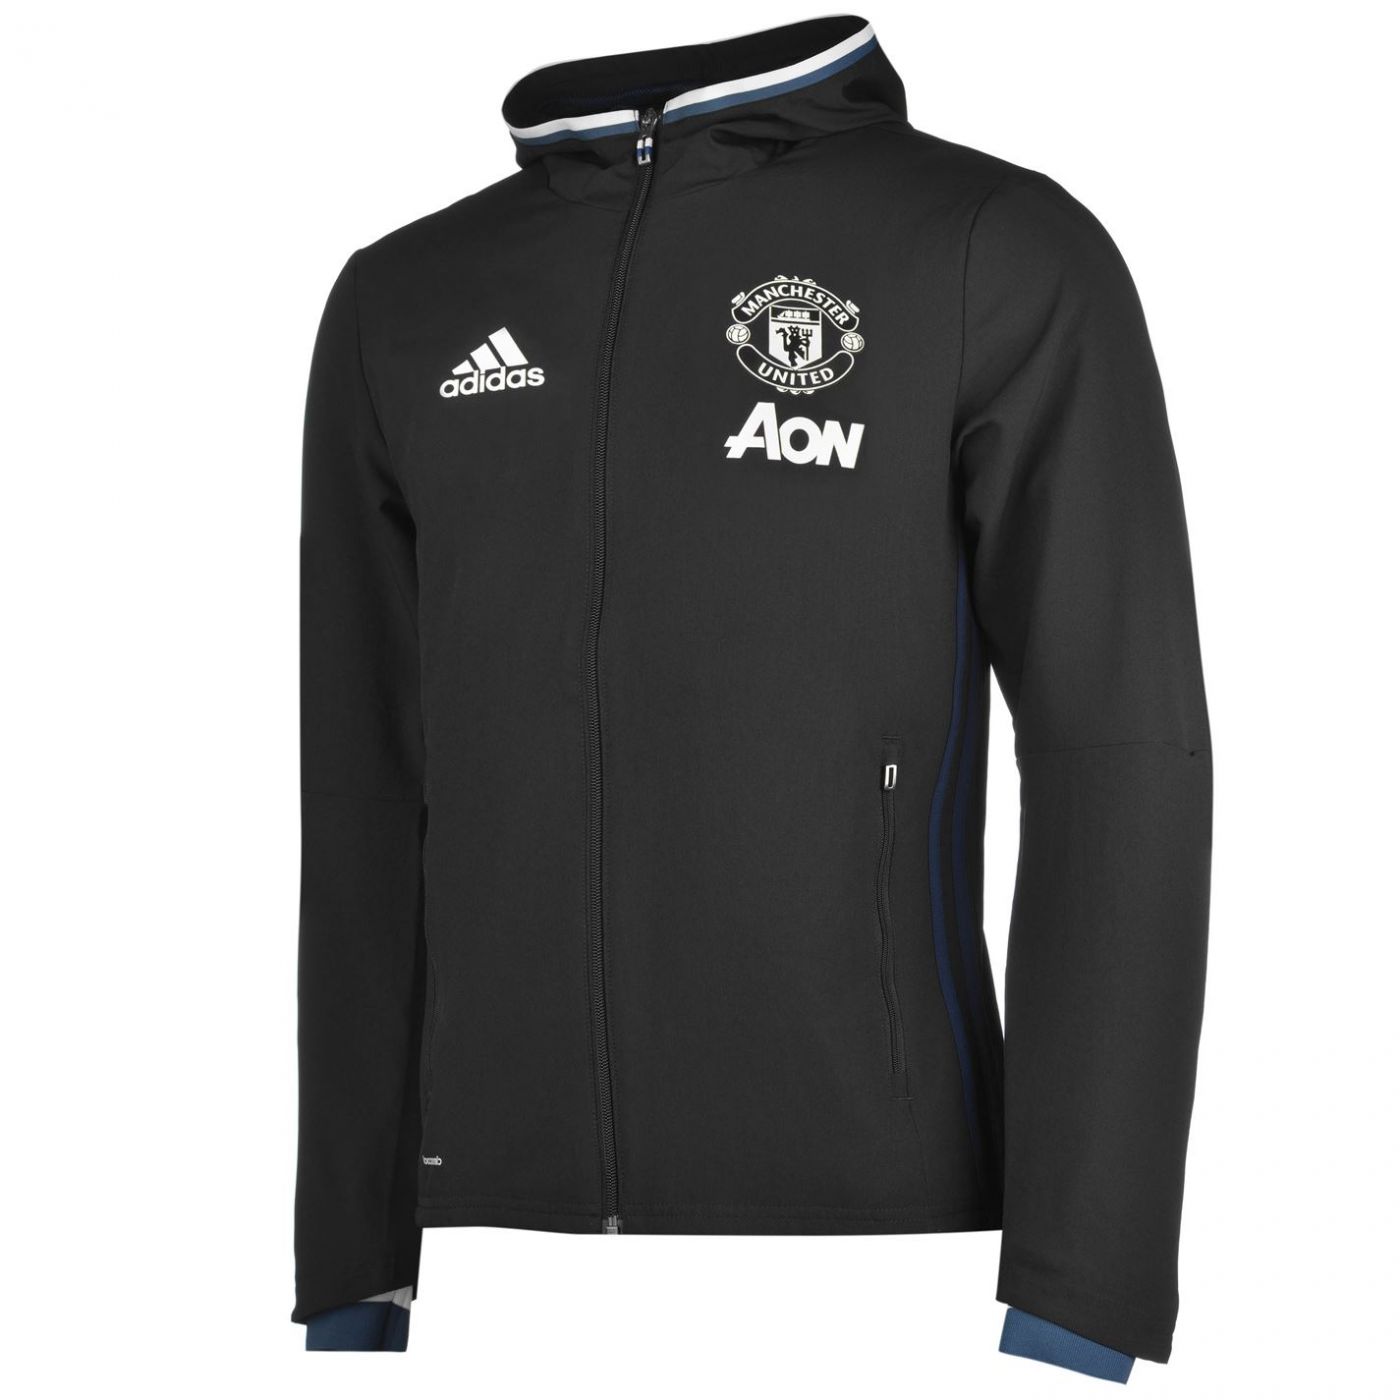 manchester united pre match jacket